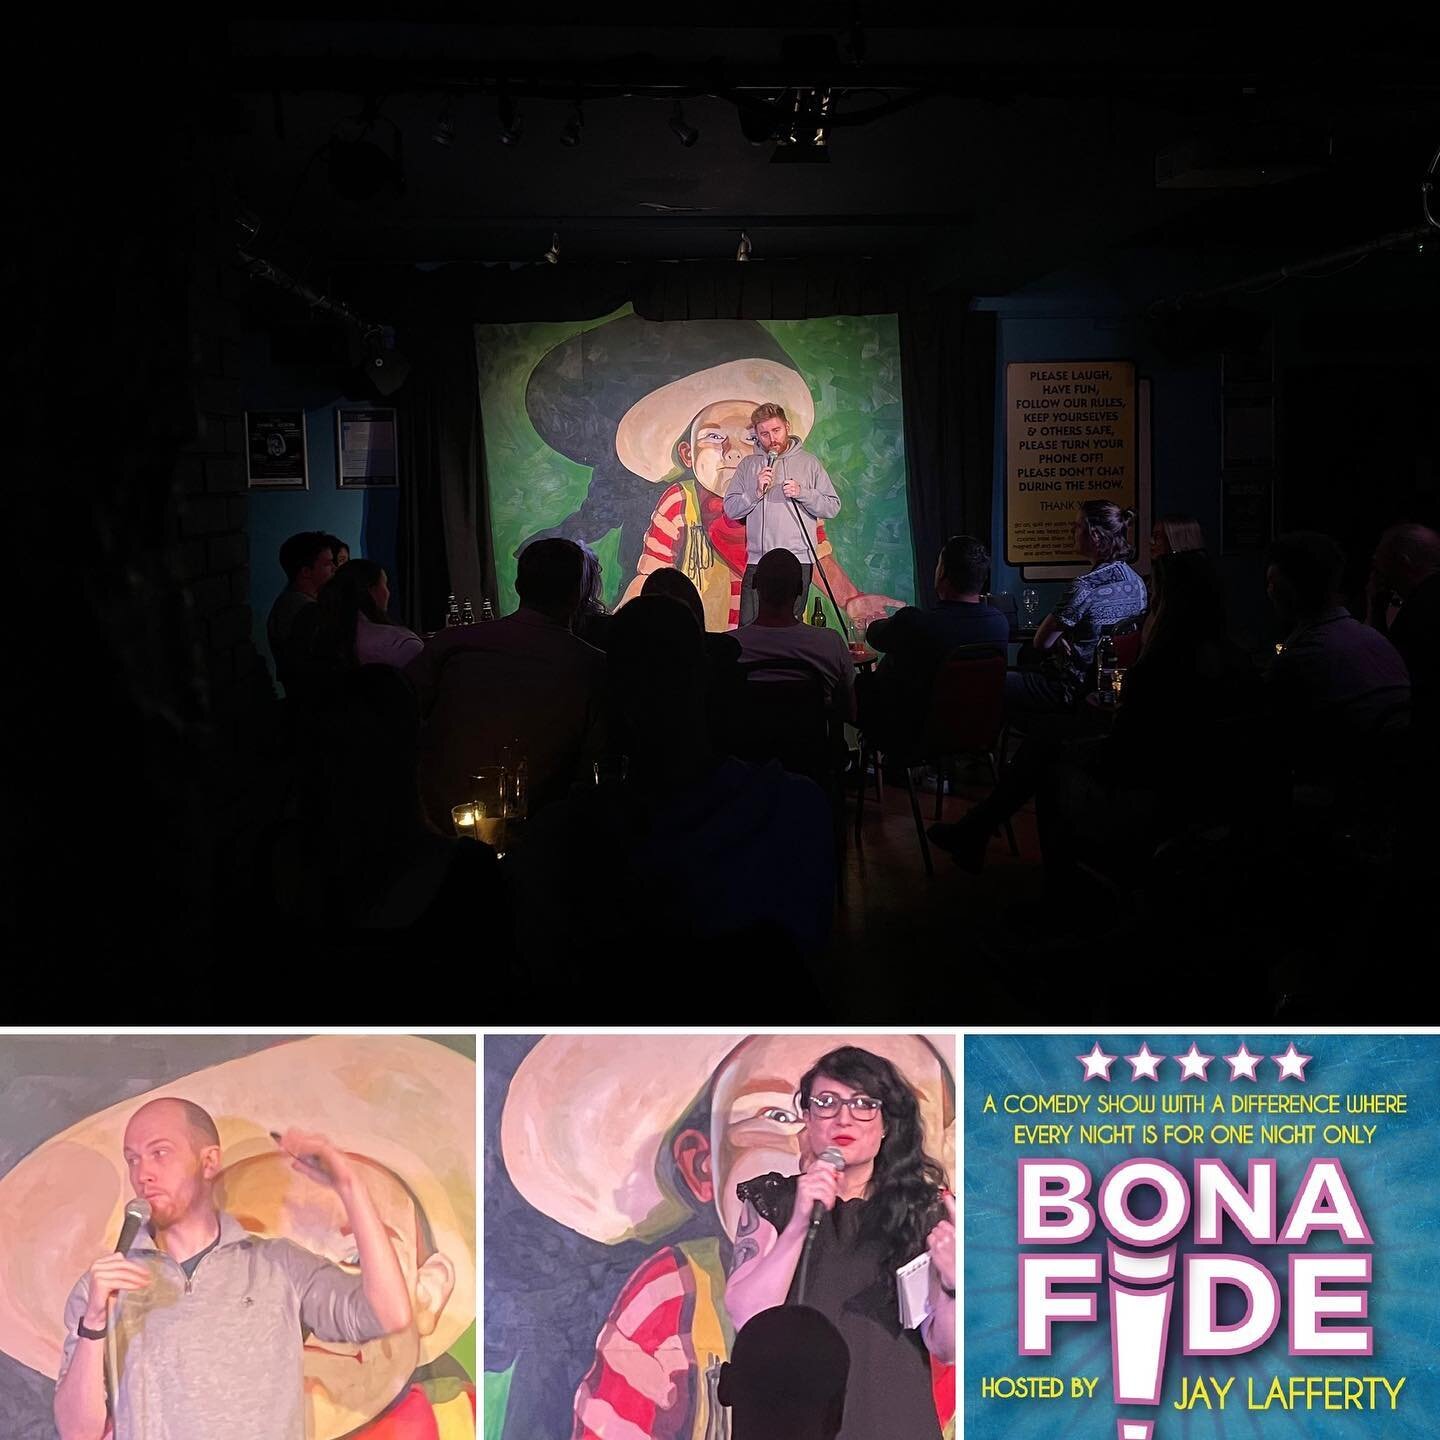 Another fantastic Bona Fide @standcomedyclub huge thanks to @garethwaugh @beebabylon_ @ryancullen90 for taking on the nights theme. 

Beautiful audience and already looking forward to coming to @thestandglasgow on Thursday 25th with another line up a